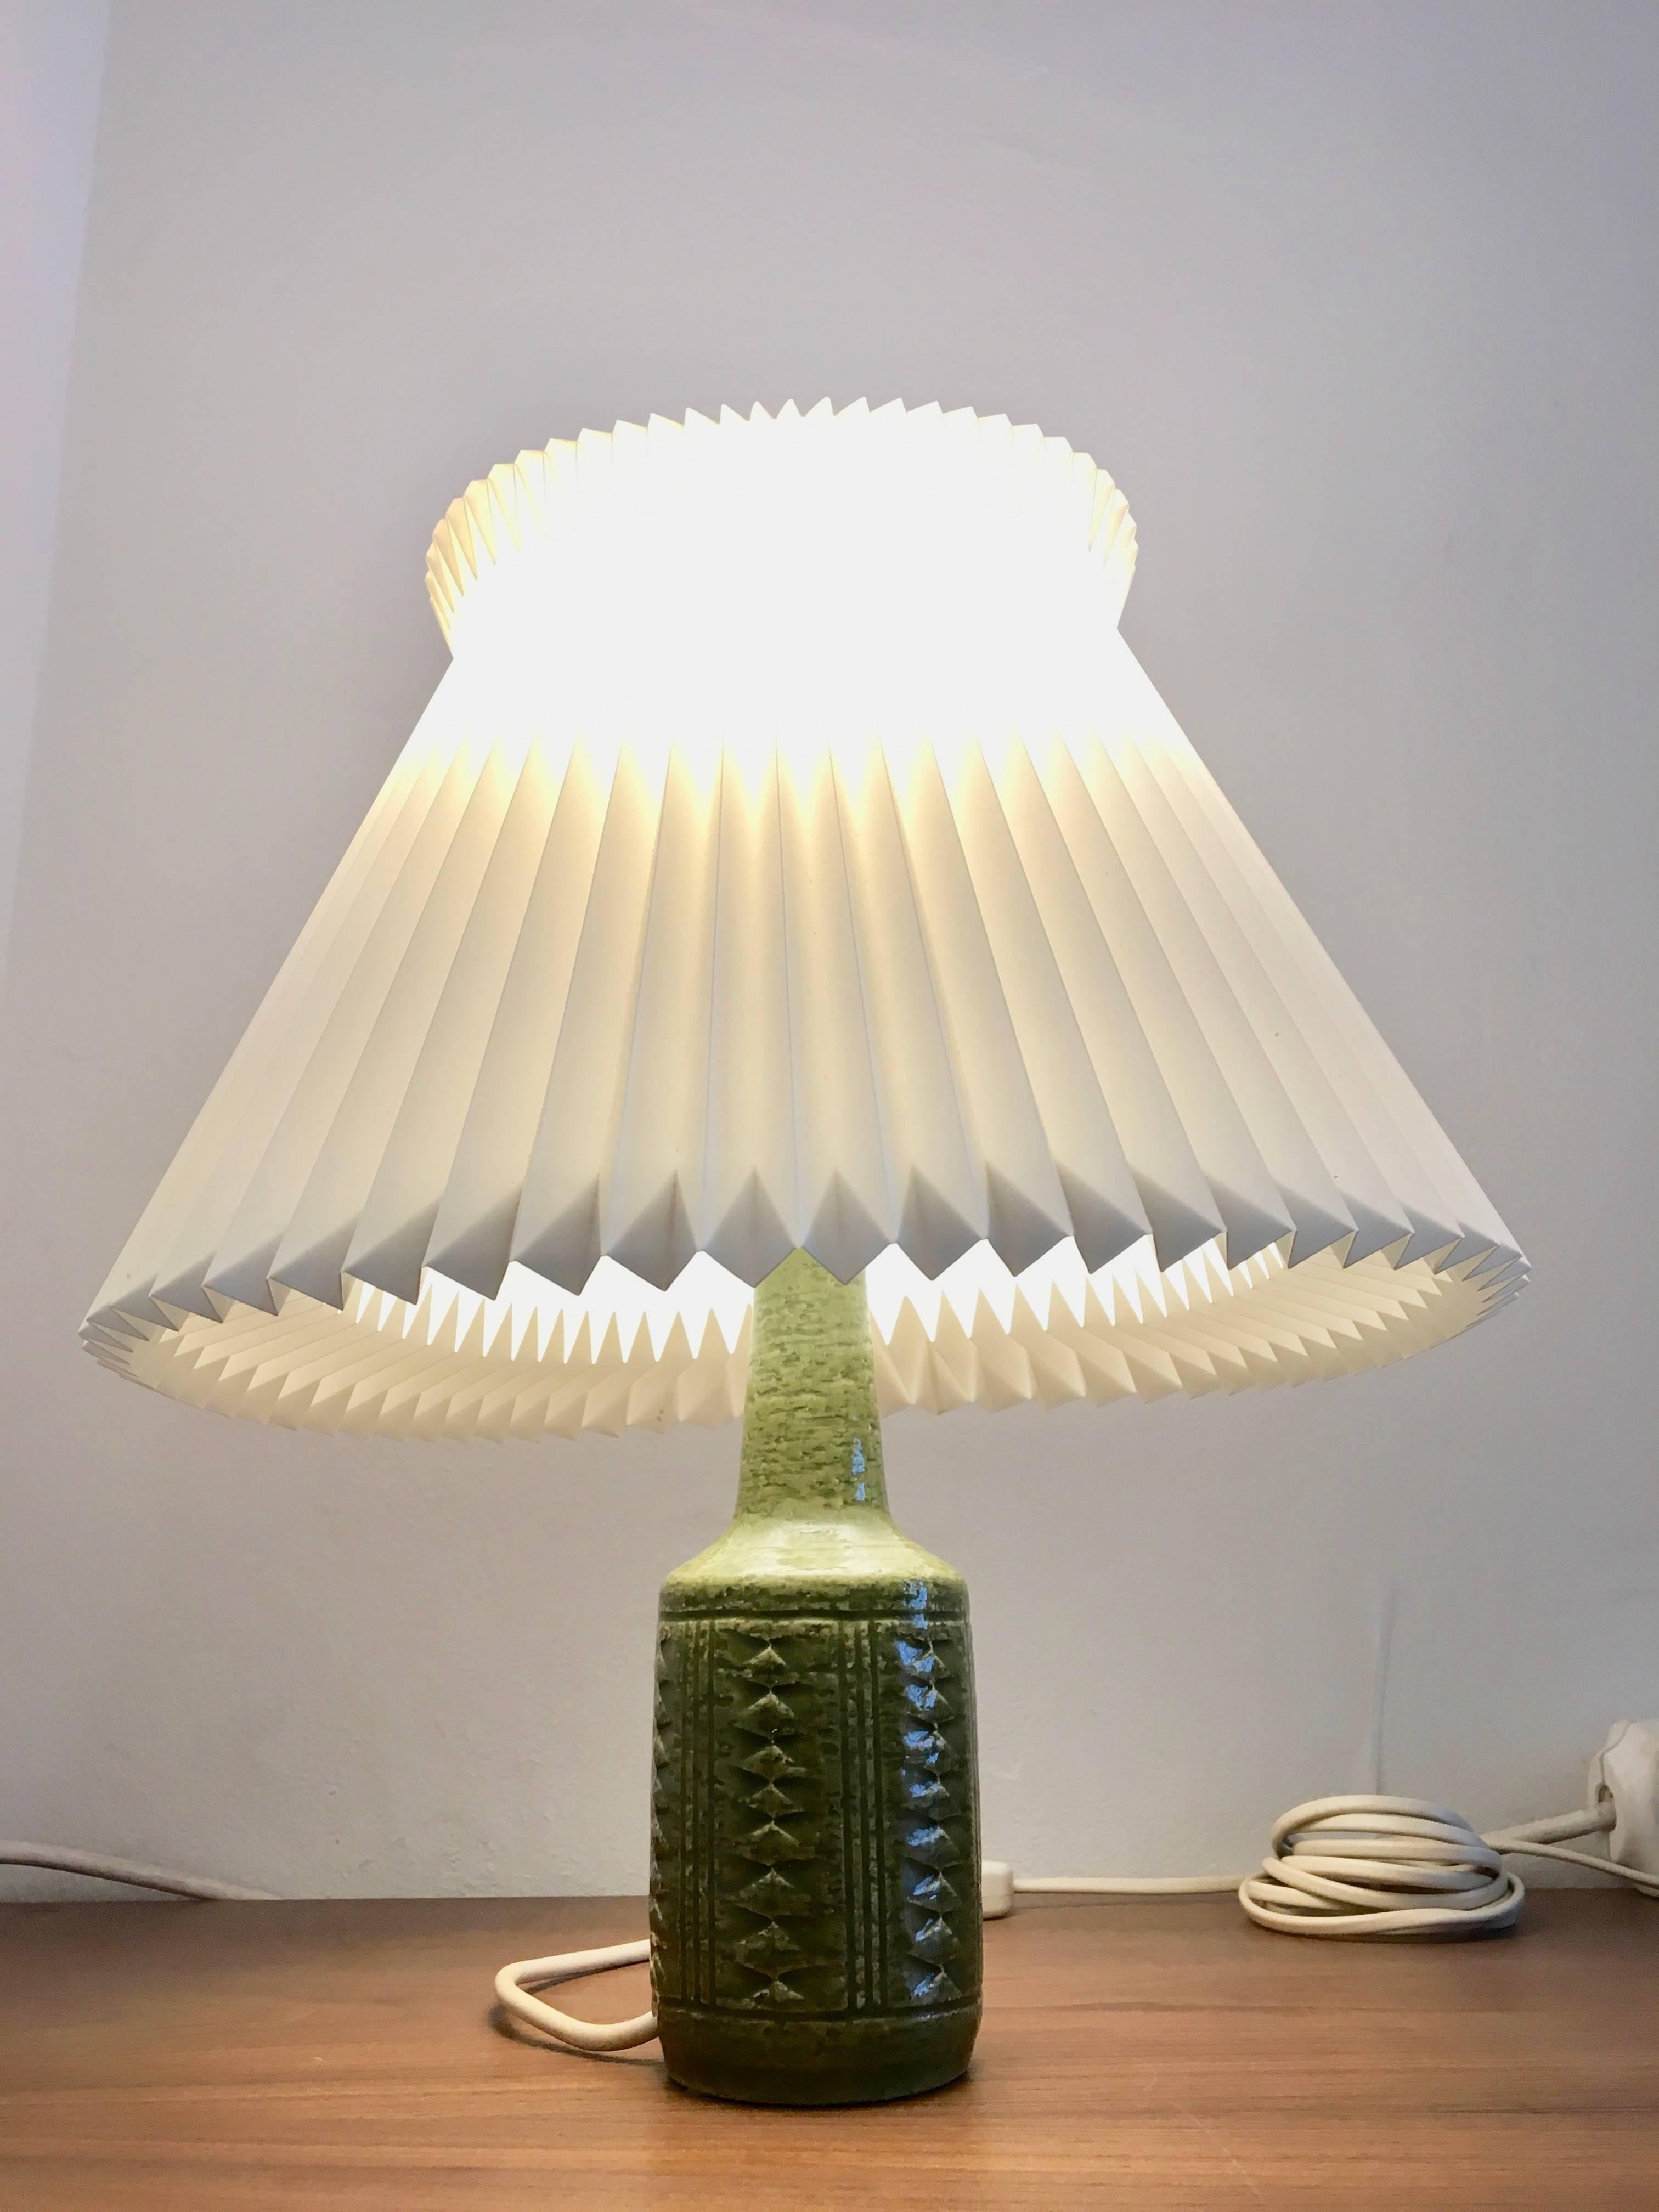 Stylish lamp from Danish Palshus with lovely grass green glaze and a Le Klint shade.
The lamp is made with chamotte clay which gives a rough surface and makes the shiny glaze look even more vivid,
circa 1960s.
Marked on verso: Palshus